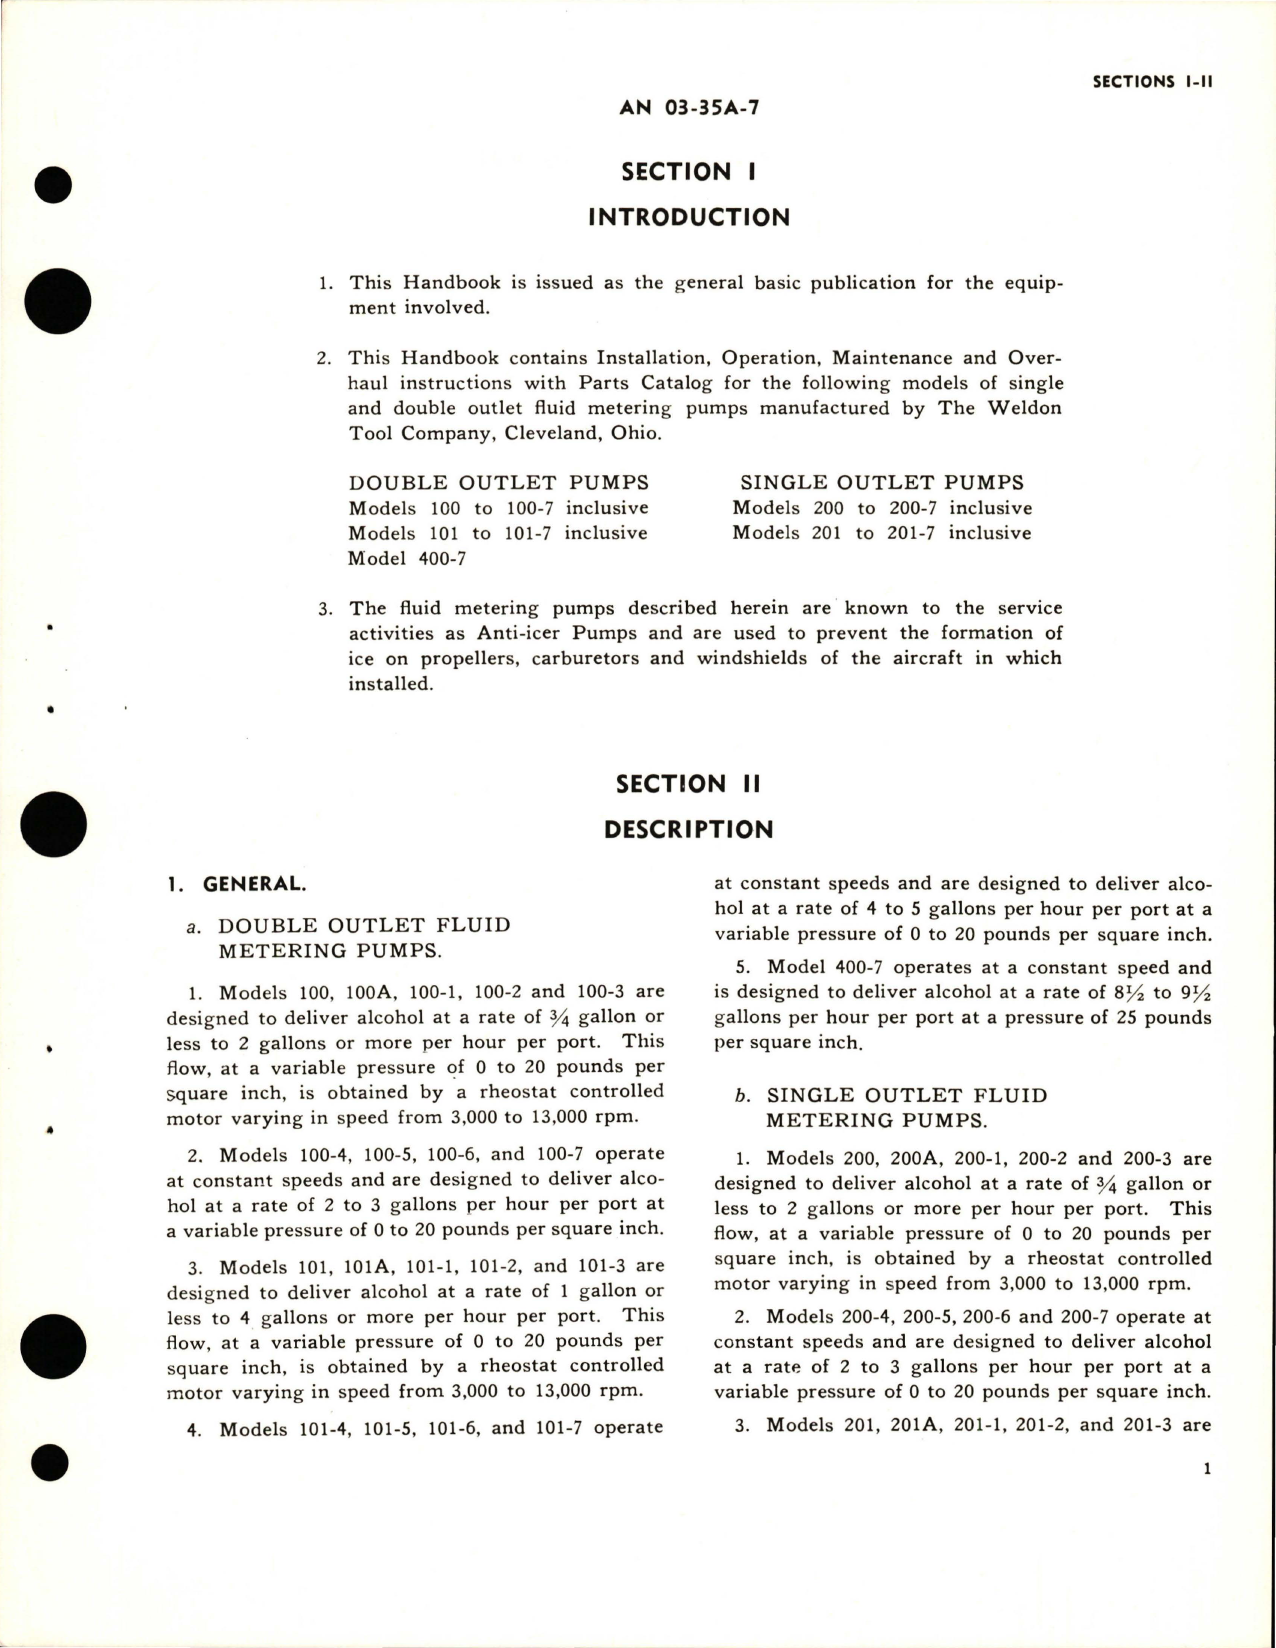 Sample page 5 from AirCorps Library document: Operation, Service and Overhaul Instructions with Parts Catalog for Anti-Icer Pumps - Double Outlet Models 